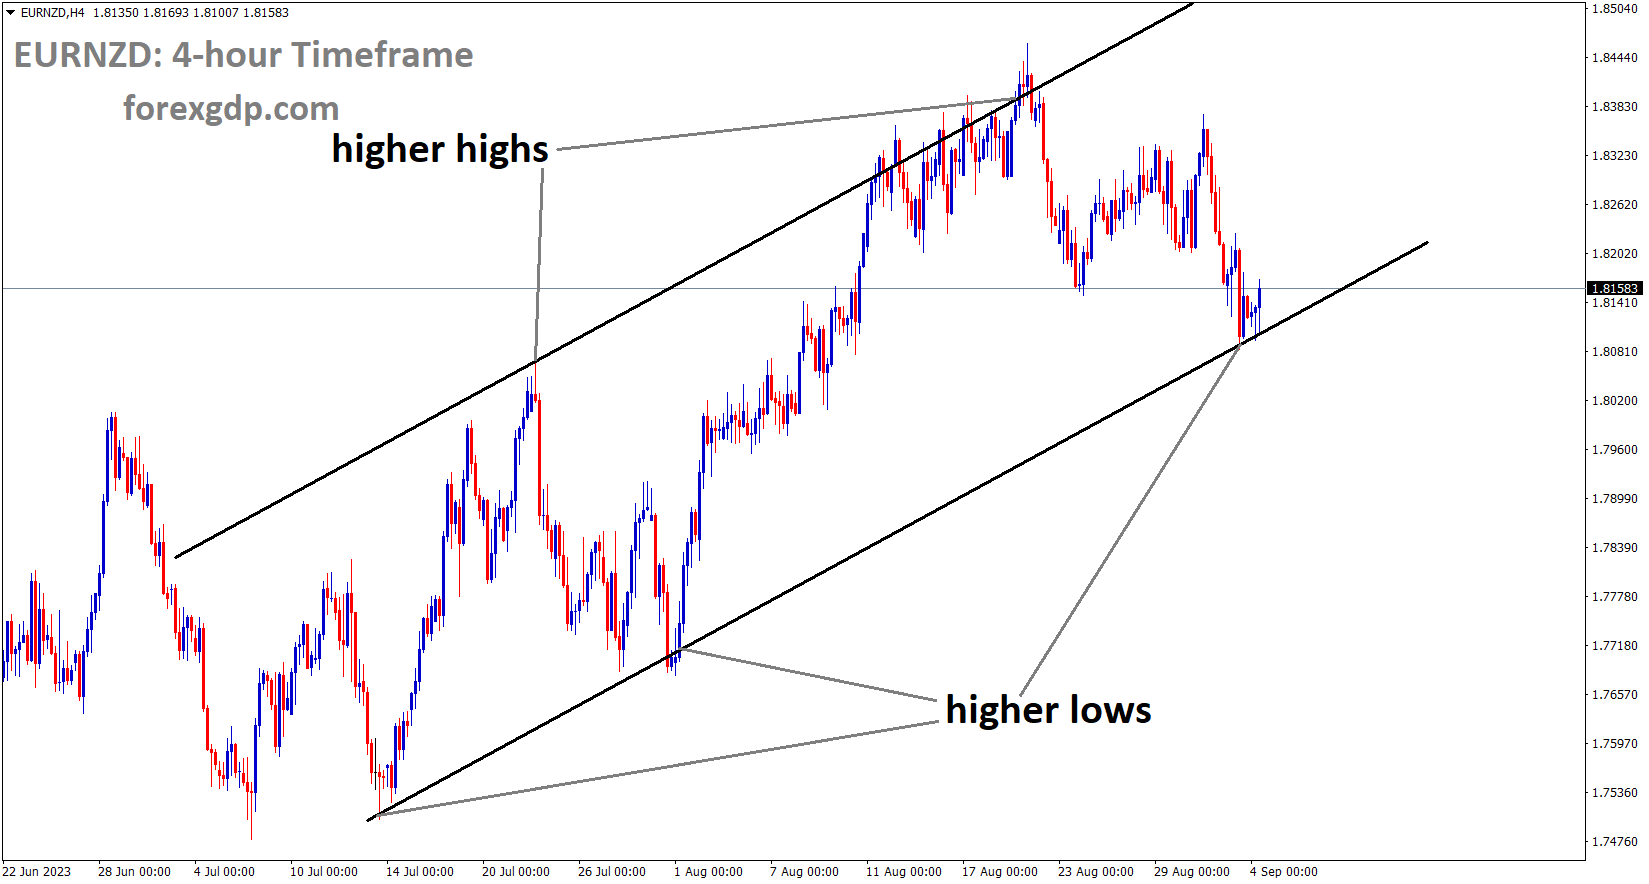 EURNZD is moving in an Ascending channel and the market has rebounded from the higher low area of the channel